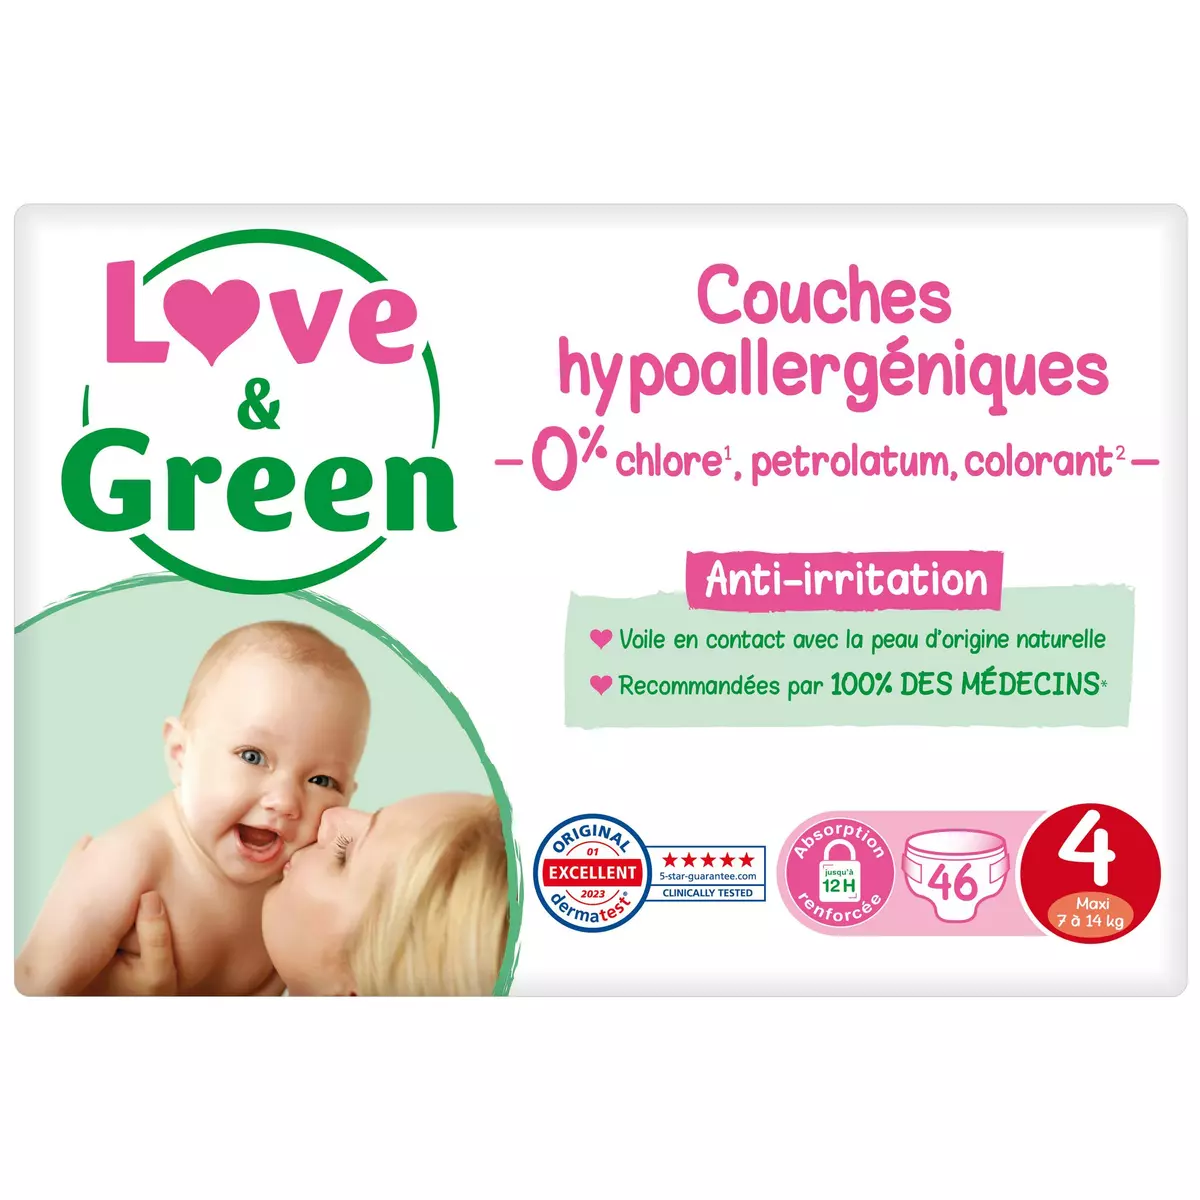 Couche love and green taille 3,4 et 4+ - Love & Green